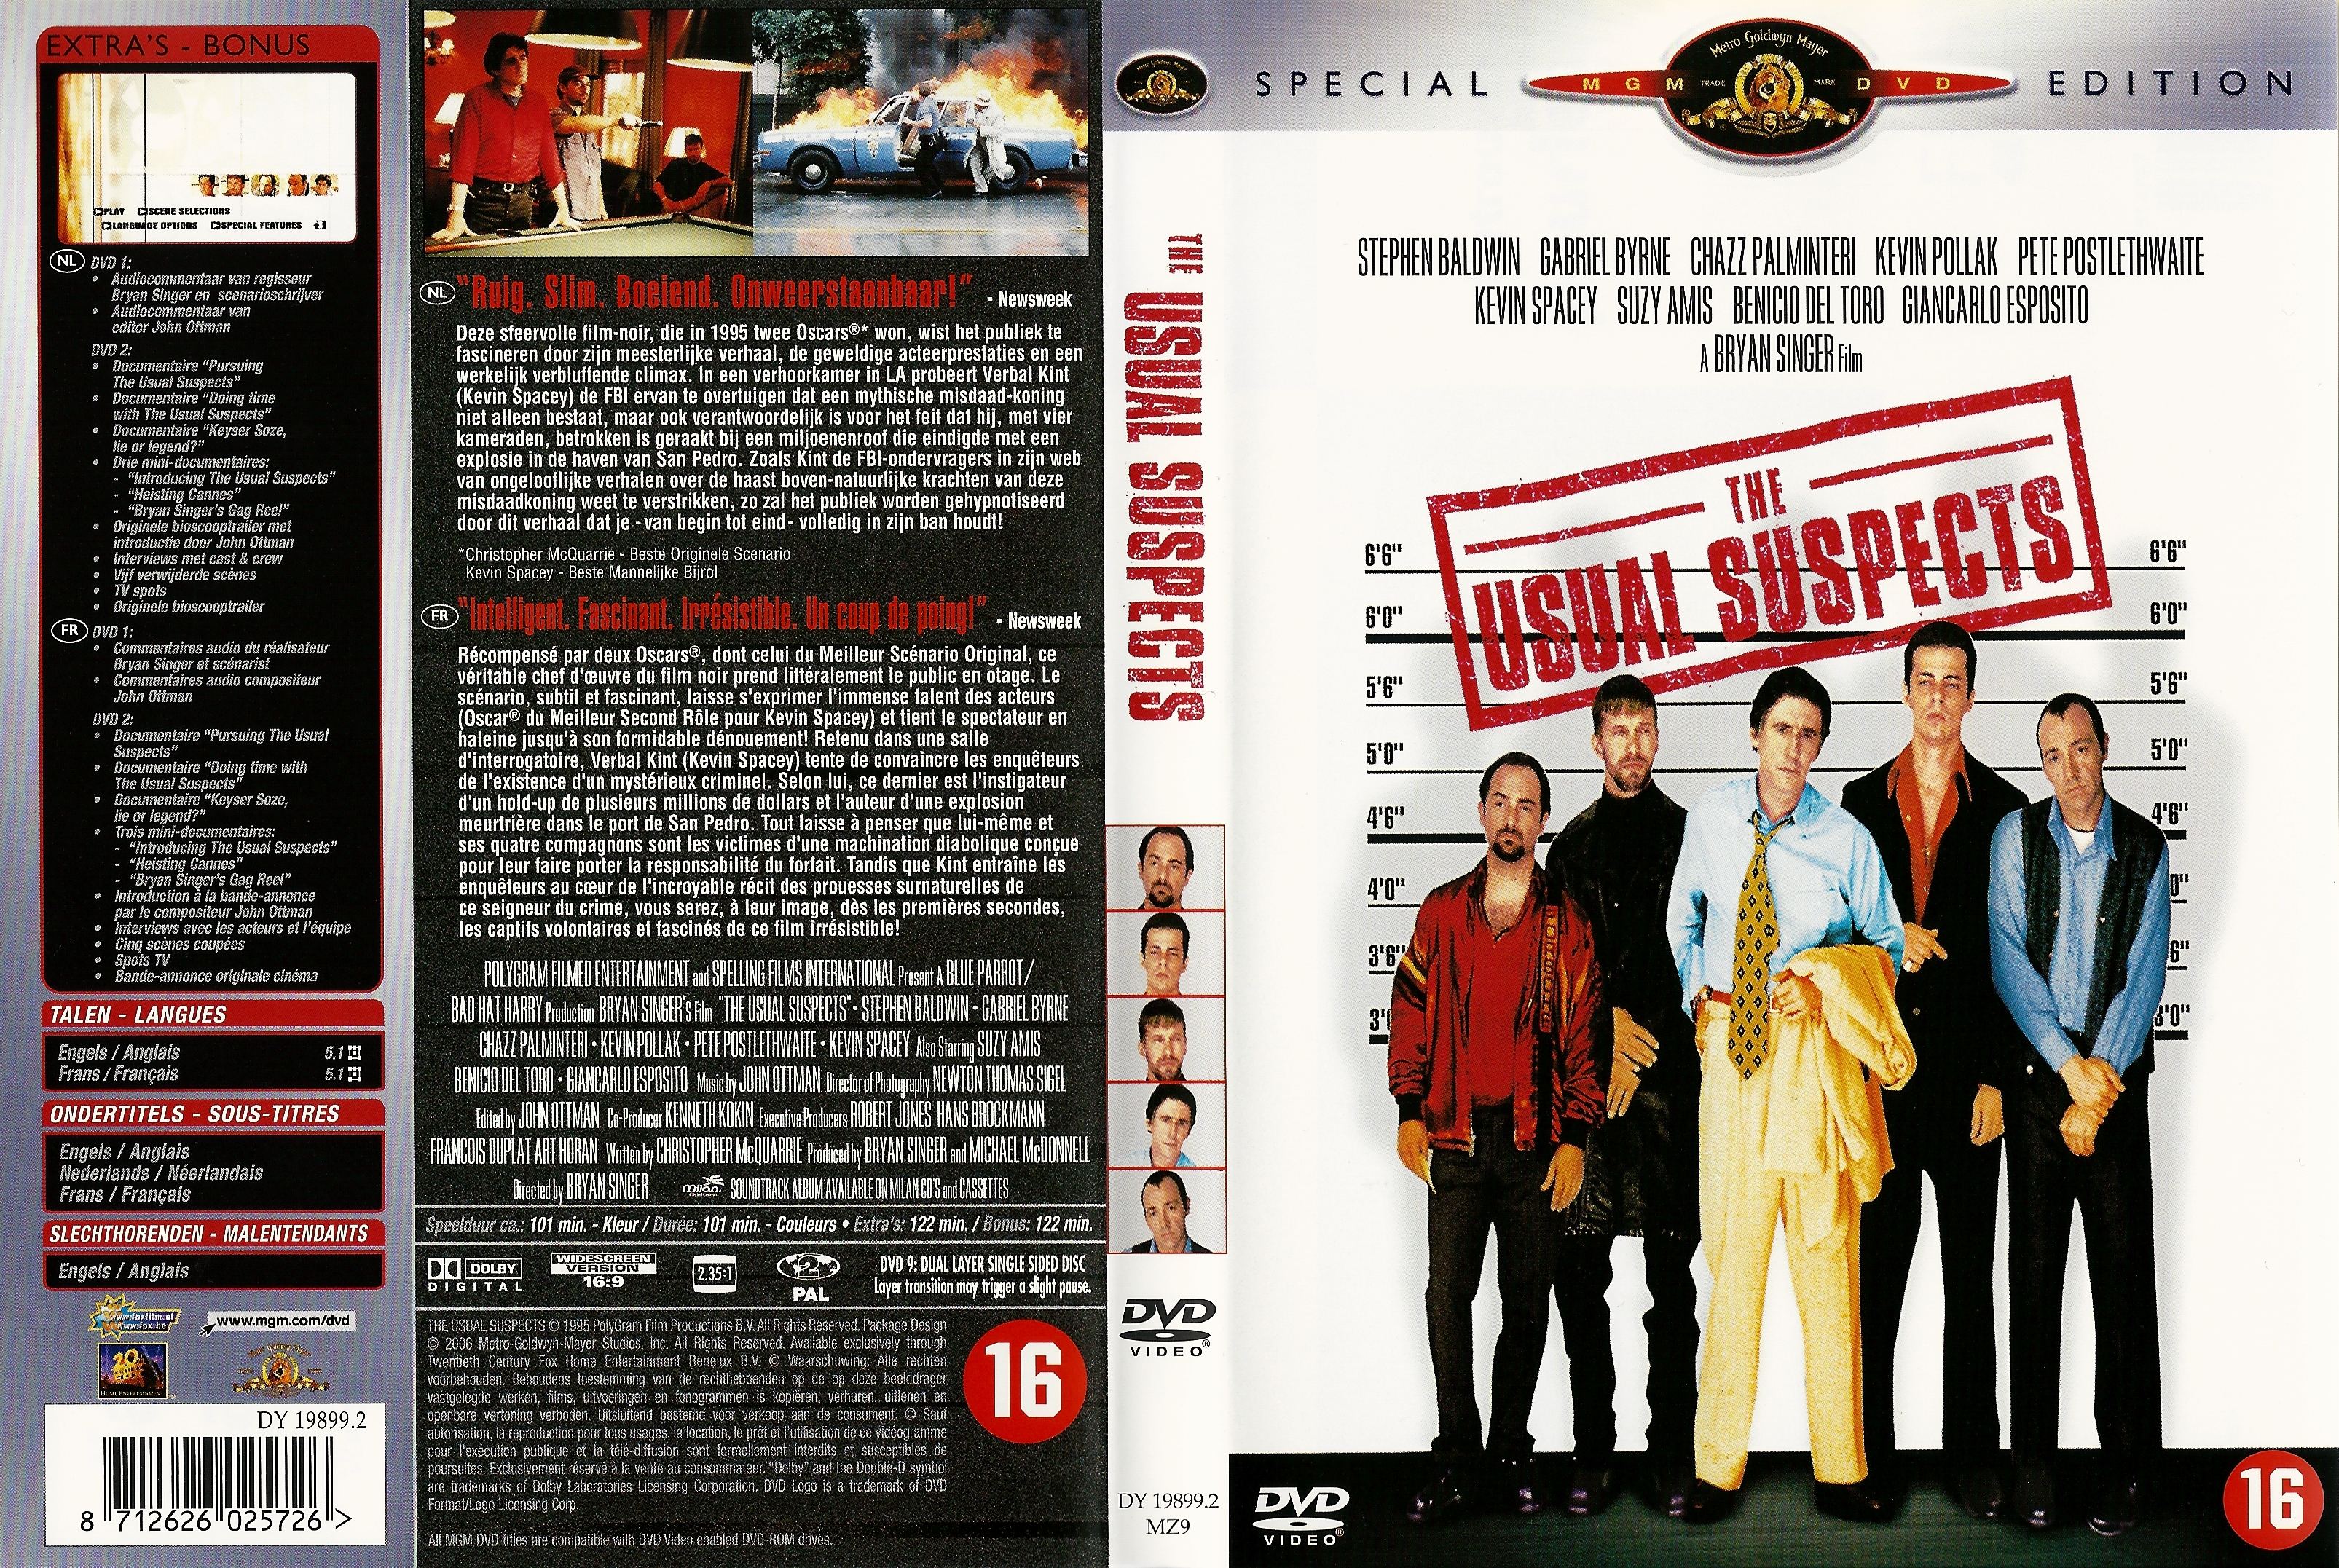 Jaquette DVD Usual suspects v3